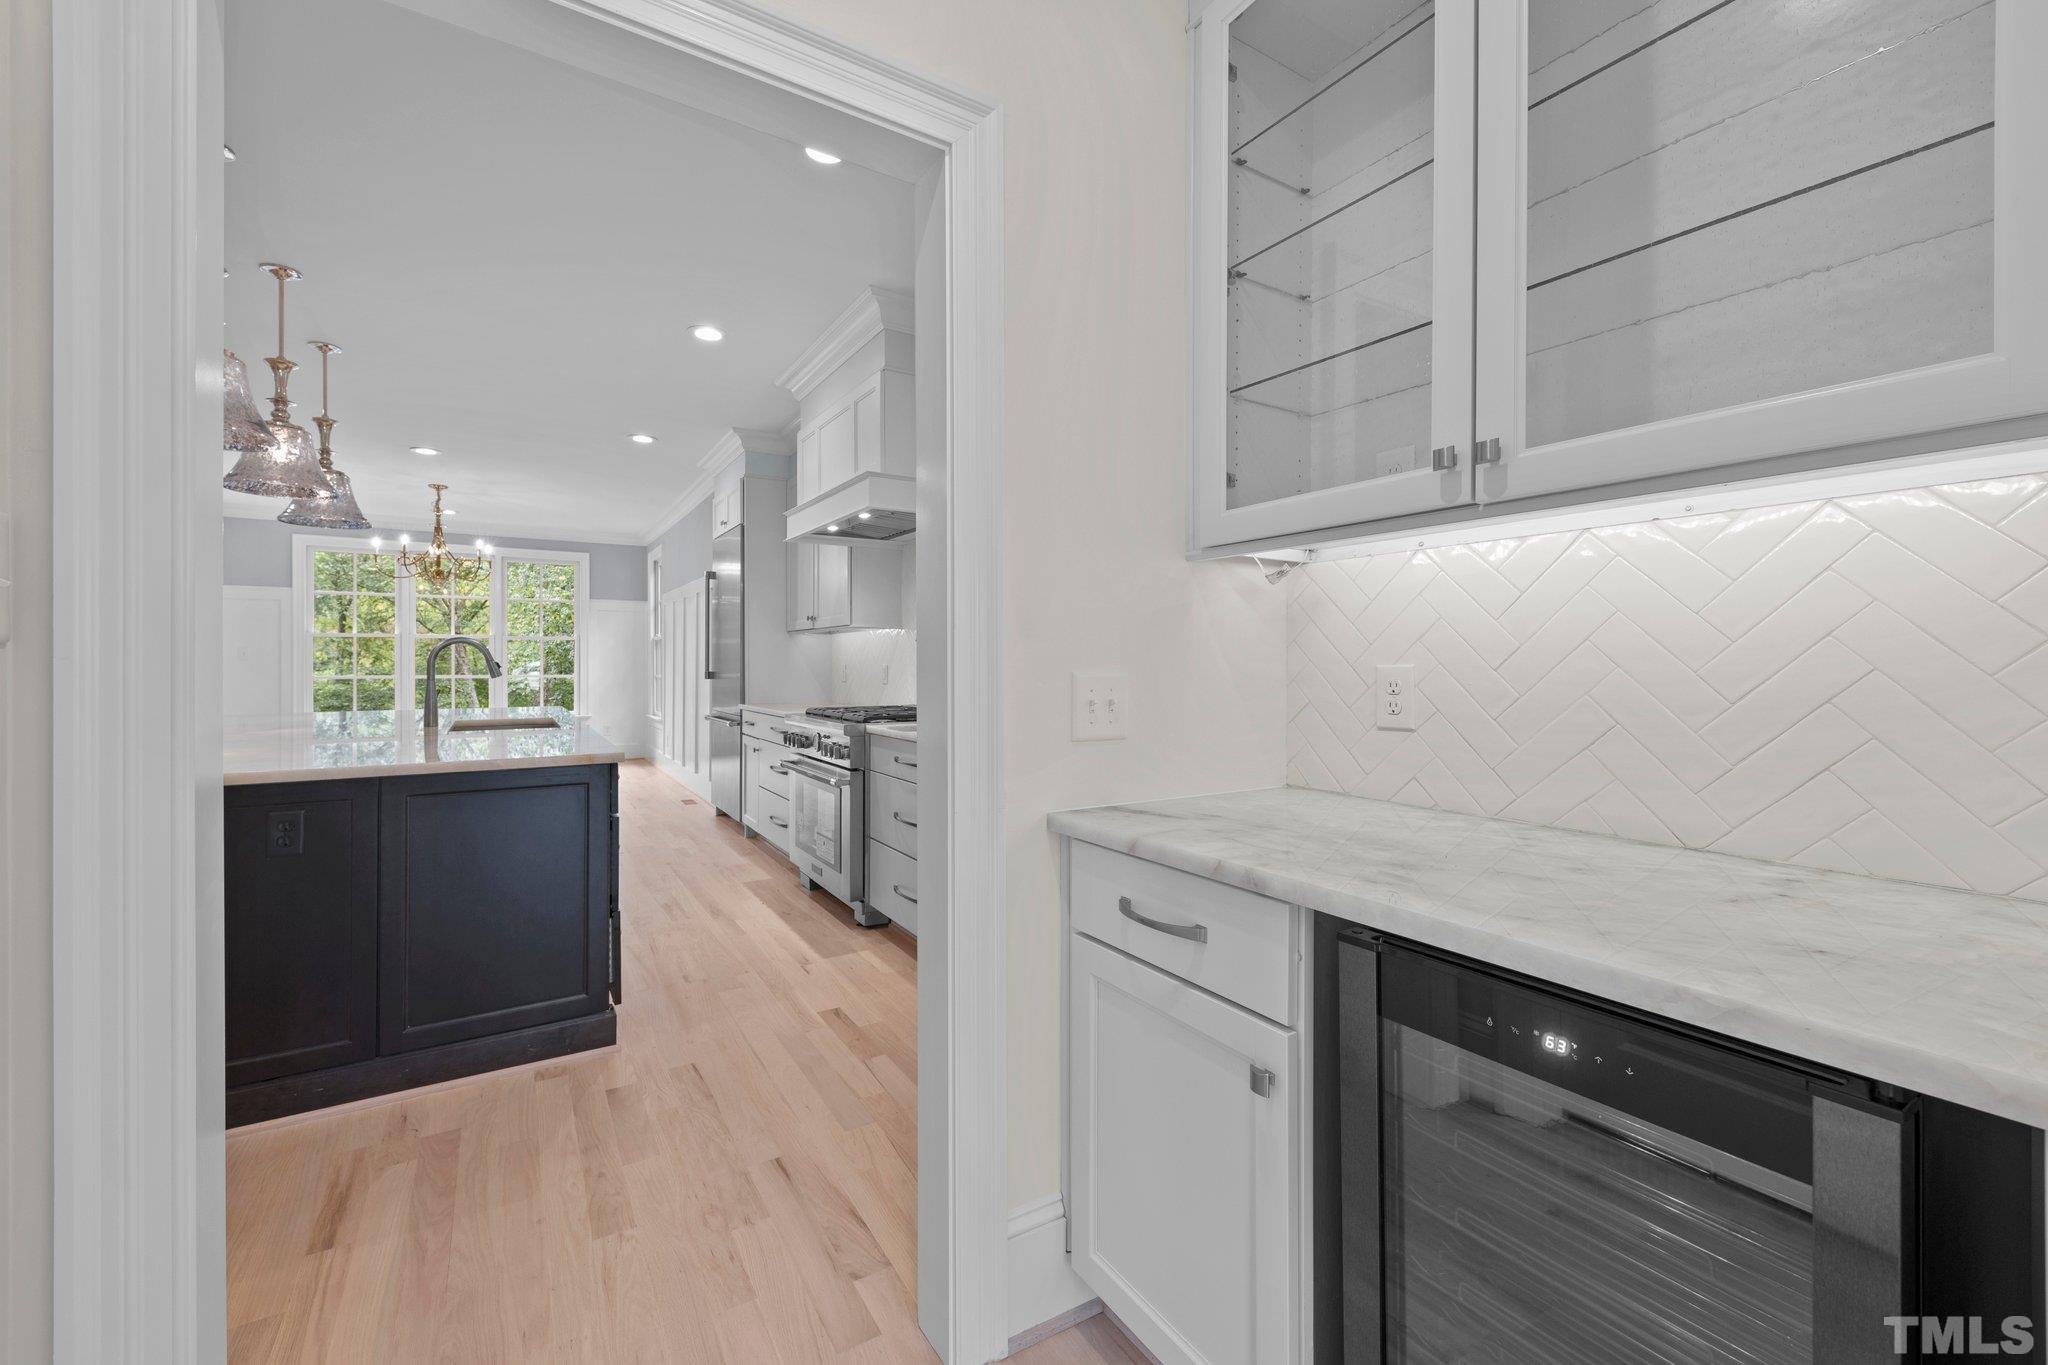 The custom butler's pantry features additional storage for your party favorites featuring a wine cooler. For more storage, you will also find a walk-in dry storage pantry across the way.